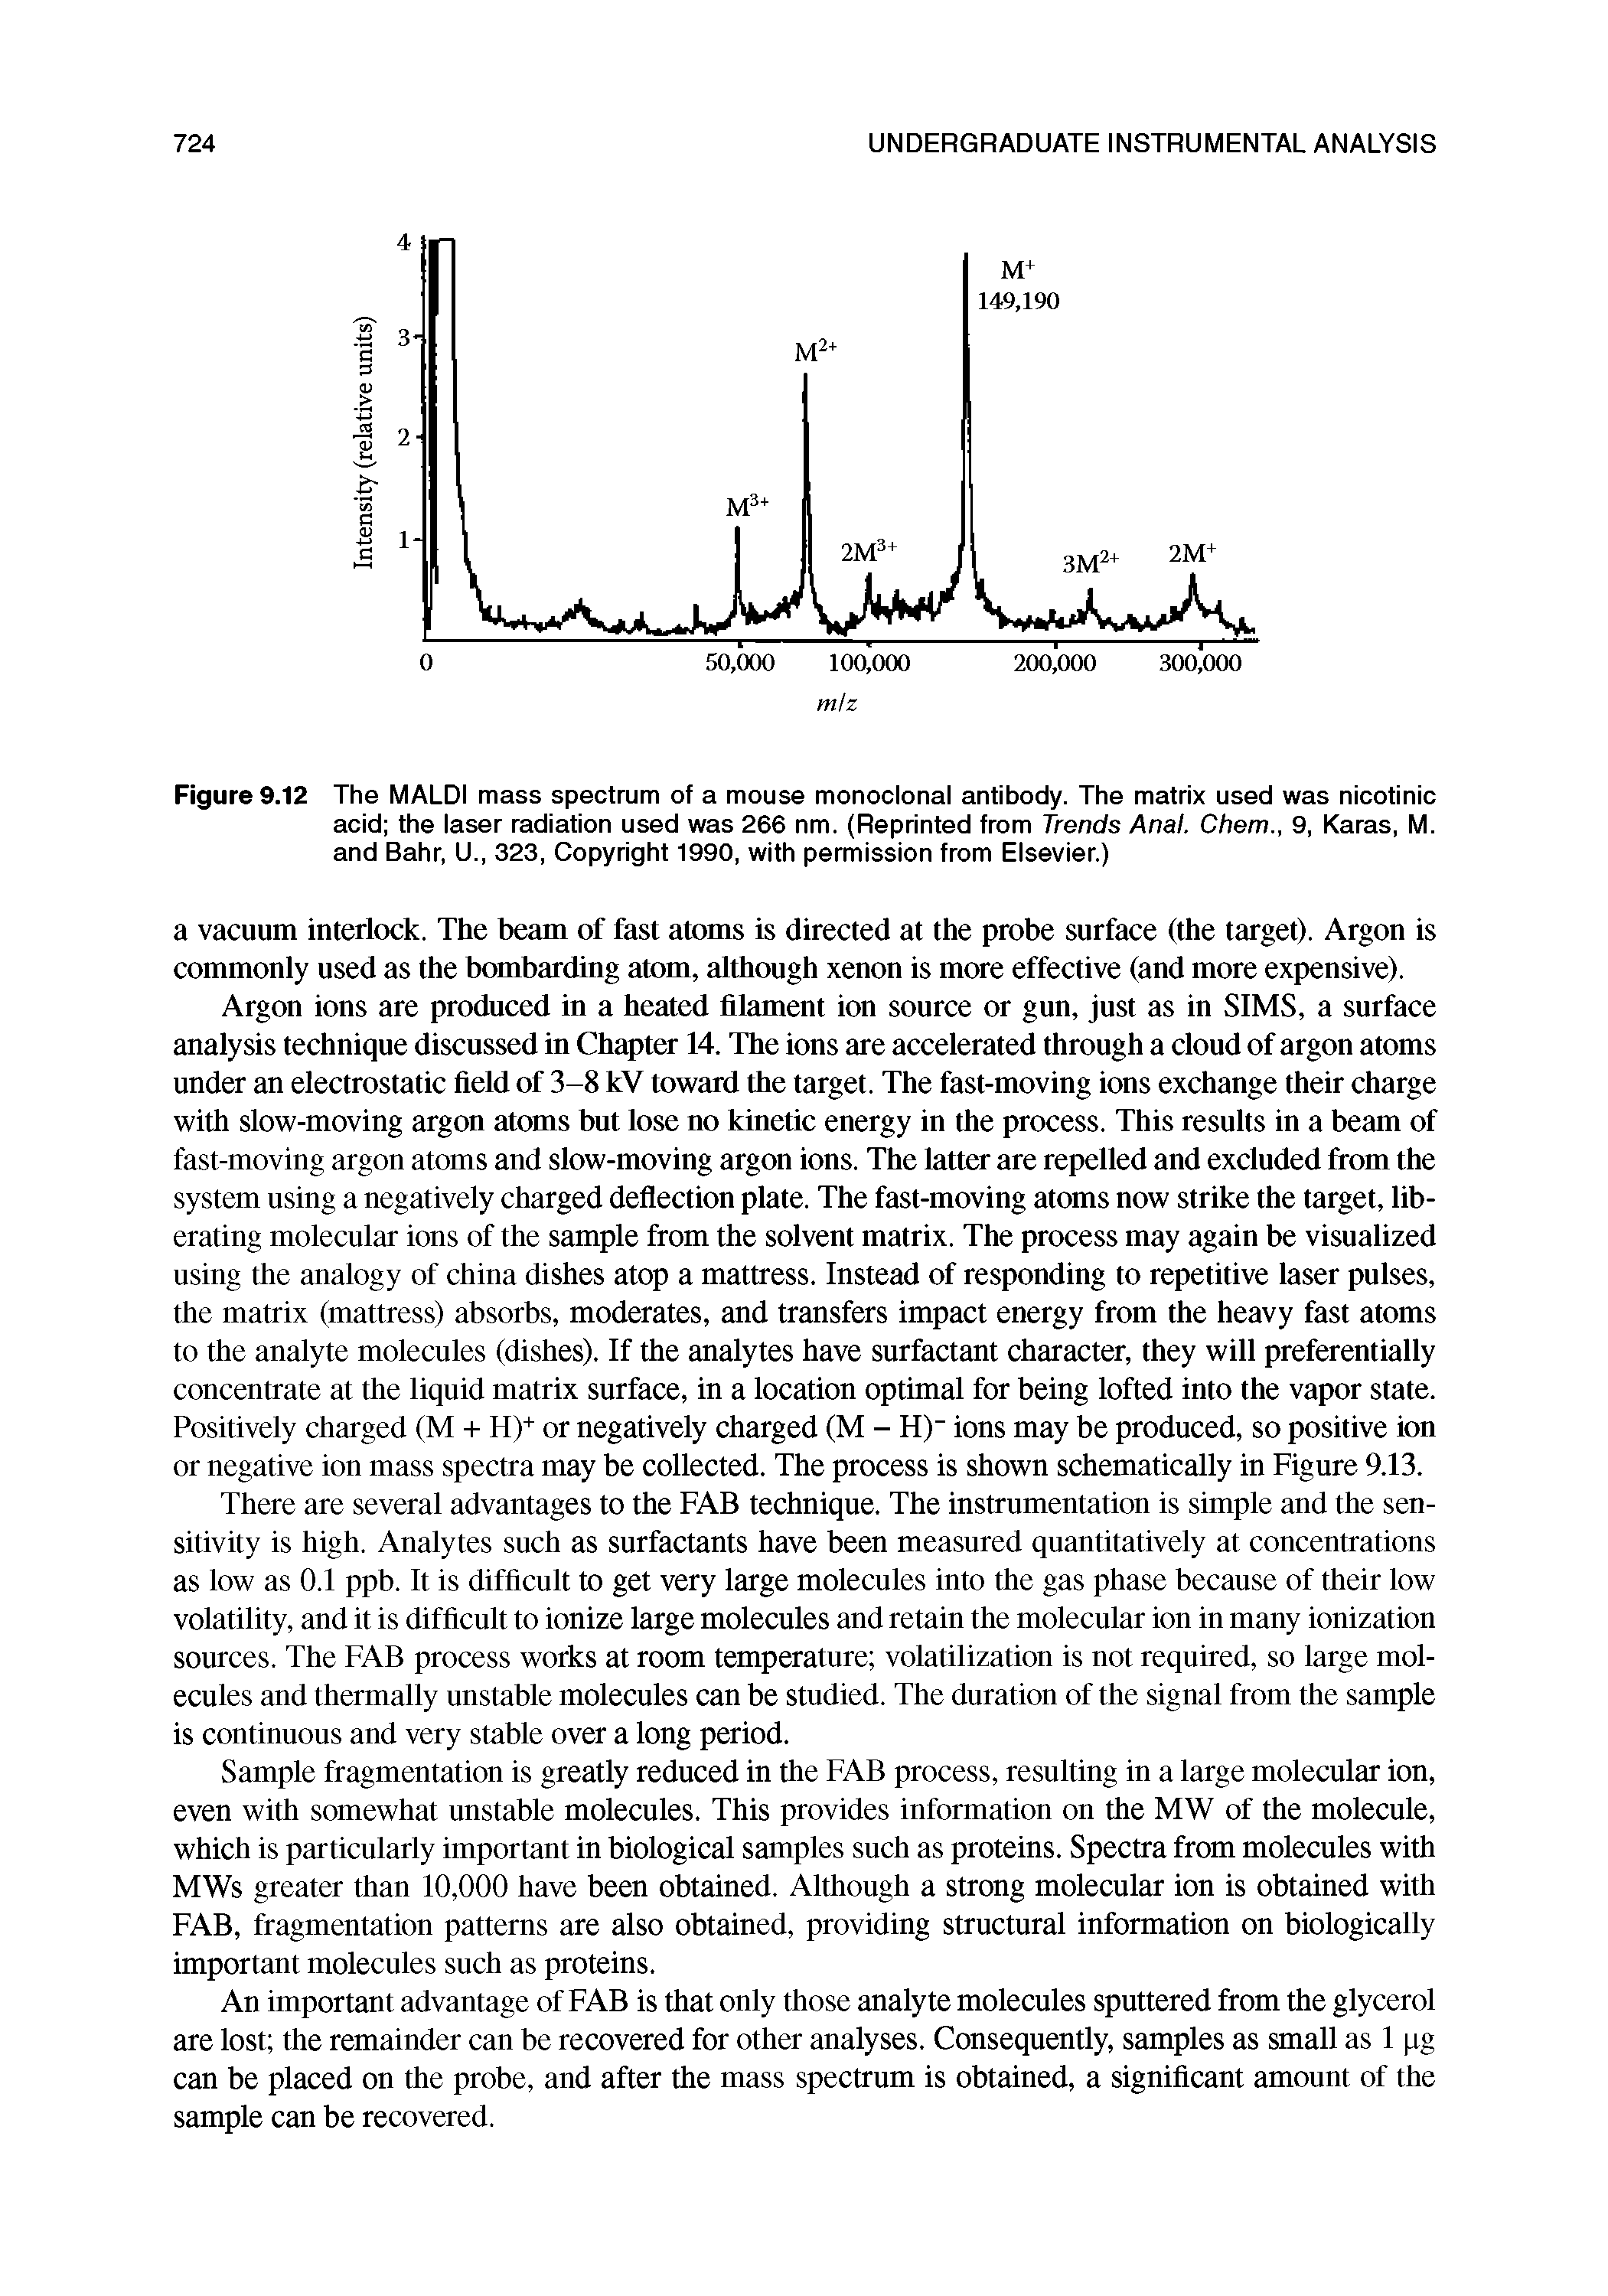 Figure 9.12 The MALDI mass spectrum of a mouse monoclonal antibody. The matrix used was nicotinic acid the laser radiation used was 266 nm. (Reprinted from Trends Anal. Chem., 9, Karas, M. and Bahr, U., 323, Copyright 1990, with permission from Elsevier.)...